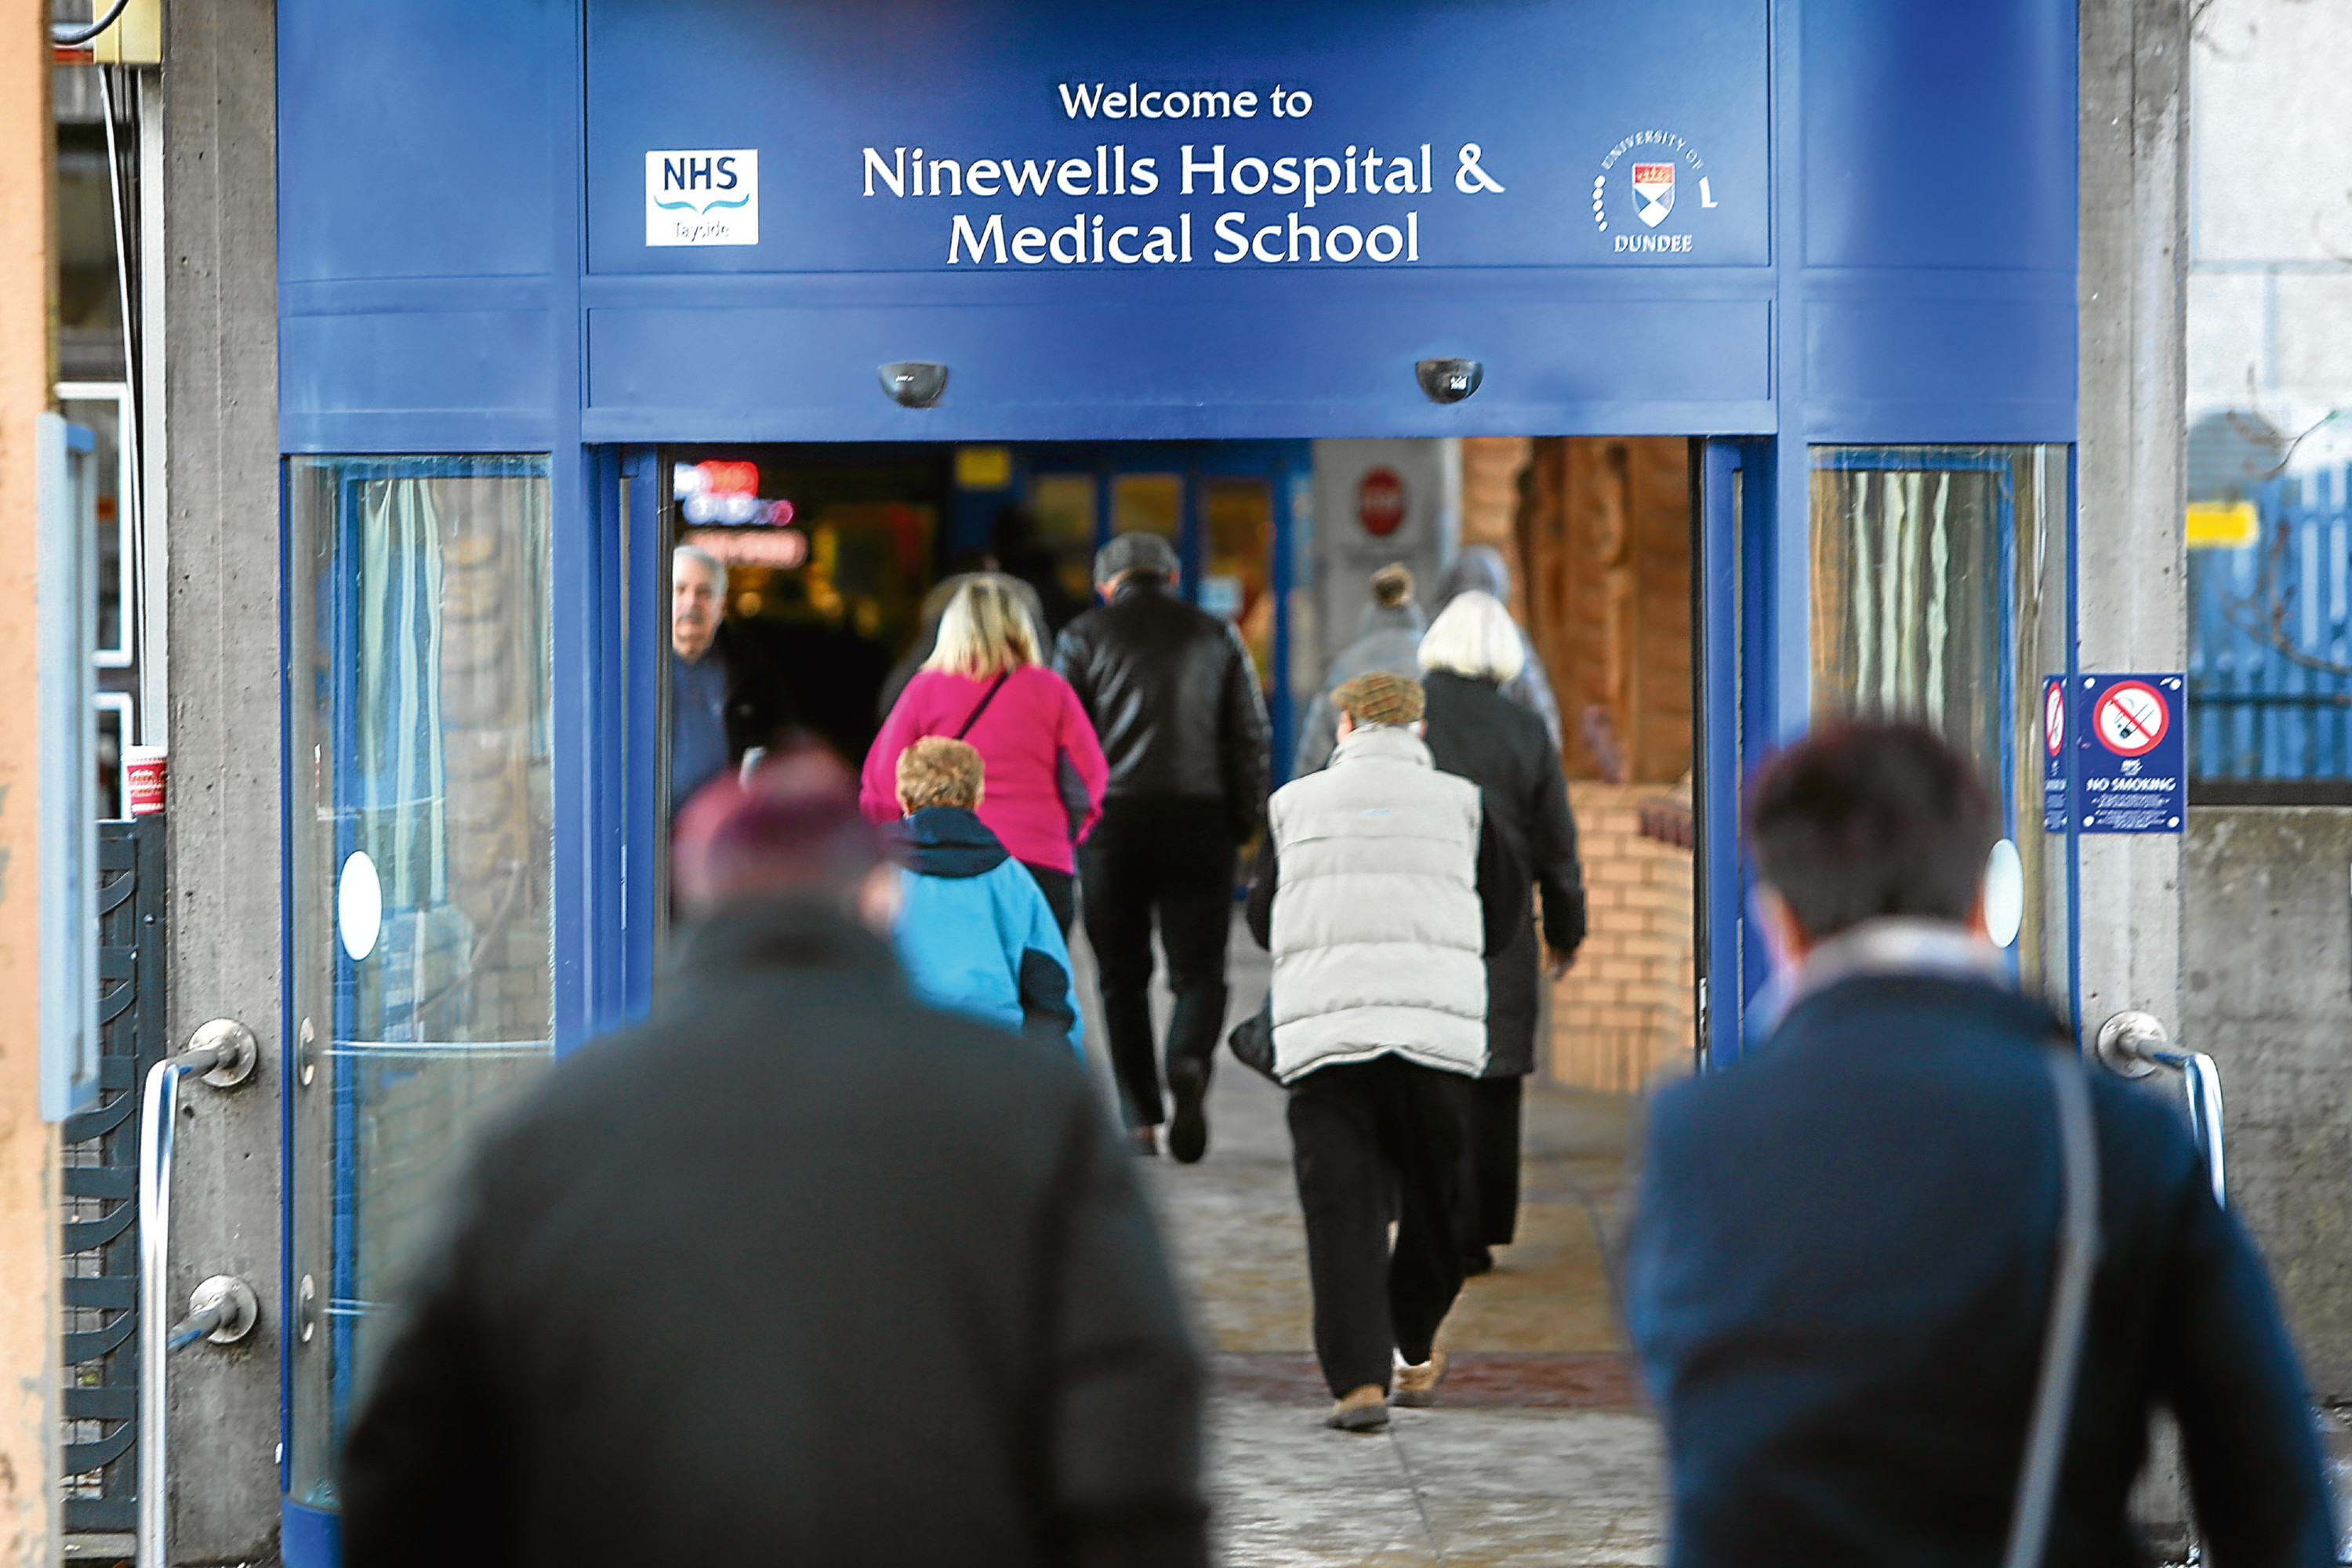 A source said staff morale is at "rock bottom" across NHS Tayside, including at Ninewells Hospital.